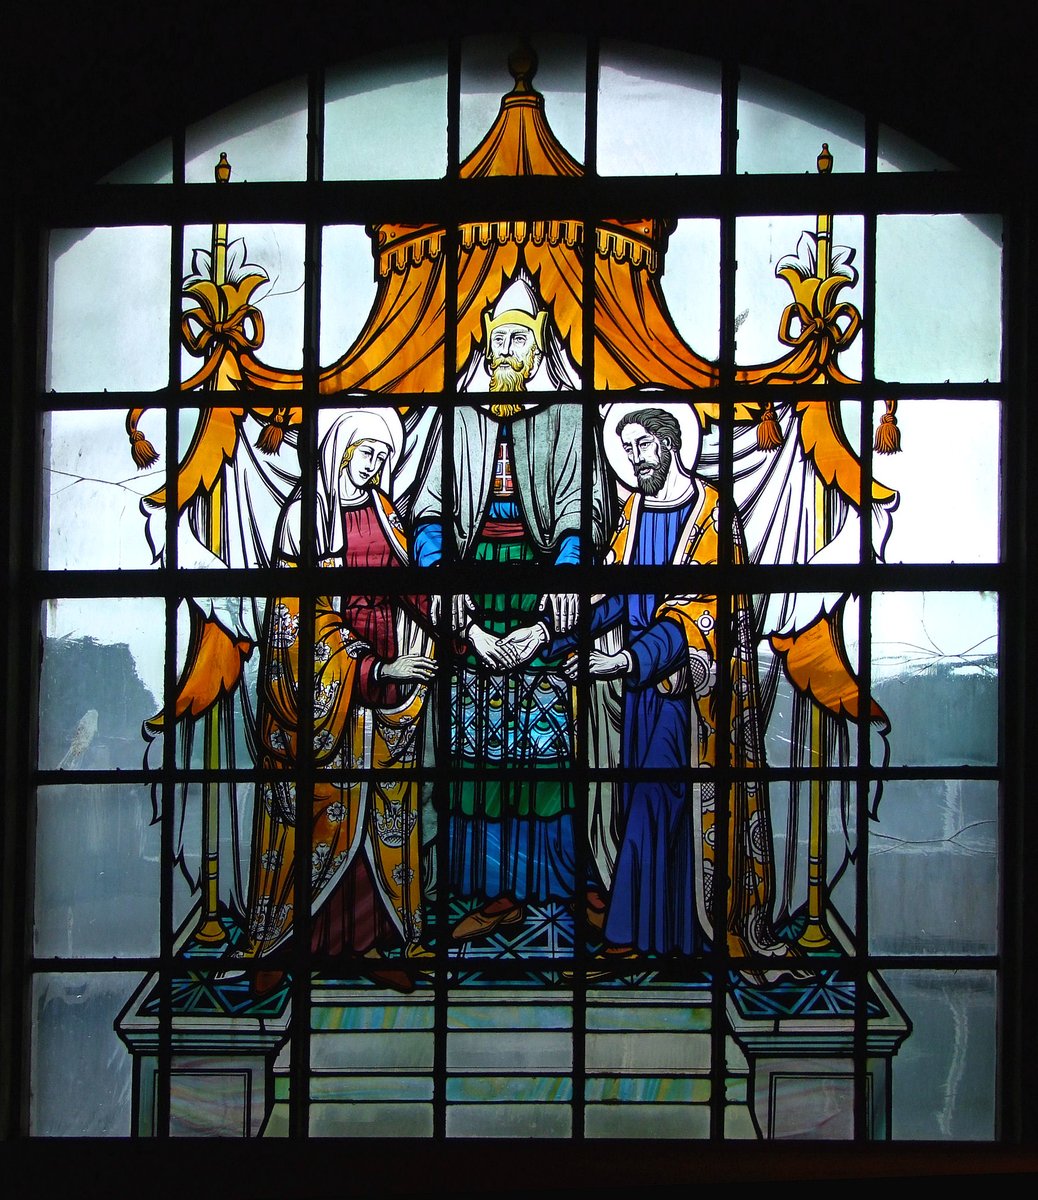 Today's the feast of St Anne and St Joachim, by tradition the parents of the Blessed Virgin. The non-canonical Gospel of St James tells their story. Their marriage in glass by Carl Edwards, 1968 at St Andrew by the Wardrobe, London.

StAndrew b t W: simonknott.co.uk/citychurches/0…